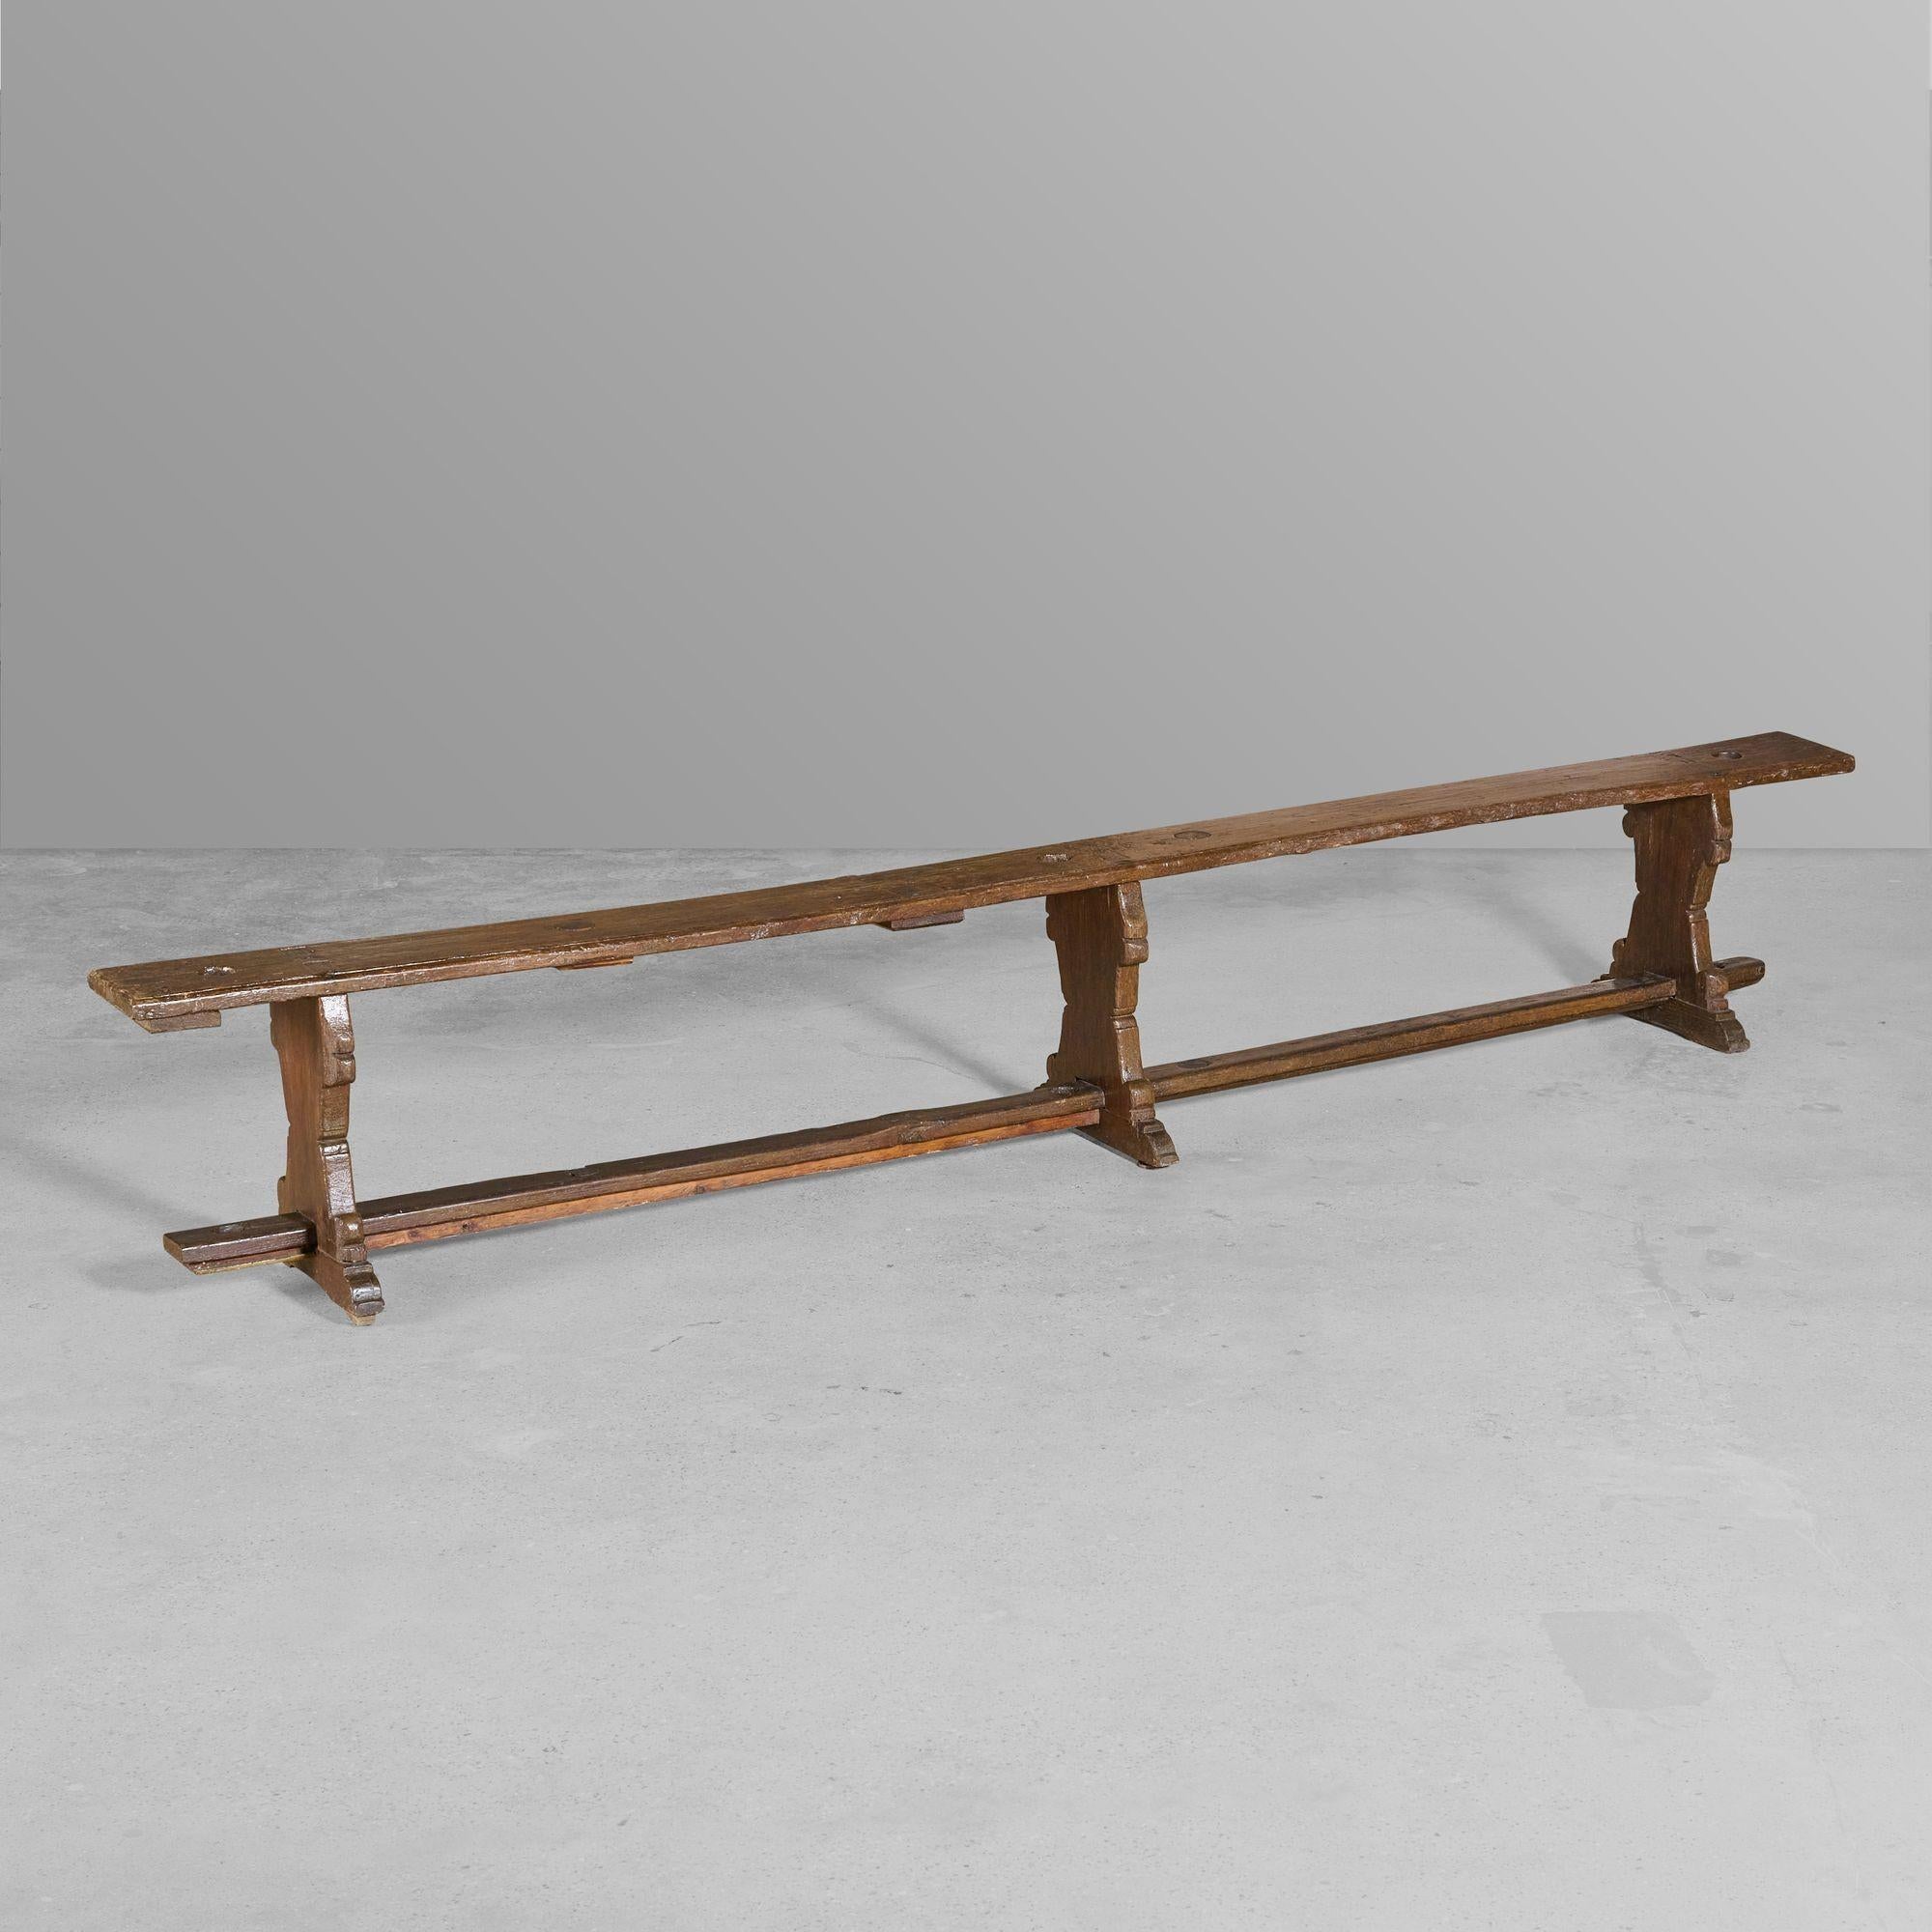 Pair of three legged wooden benches with holes for banners.